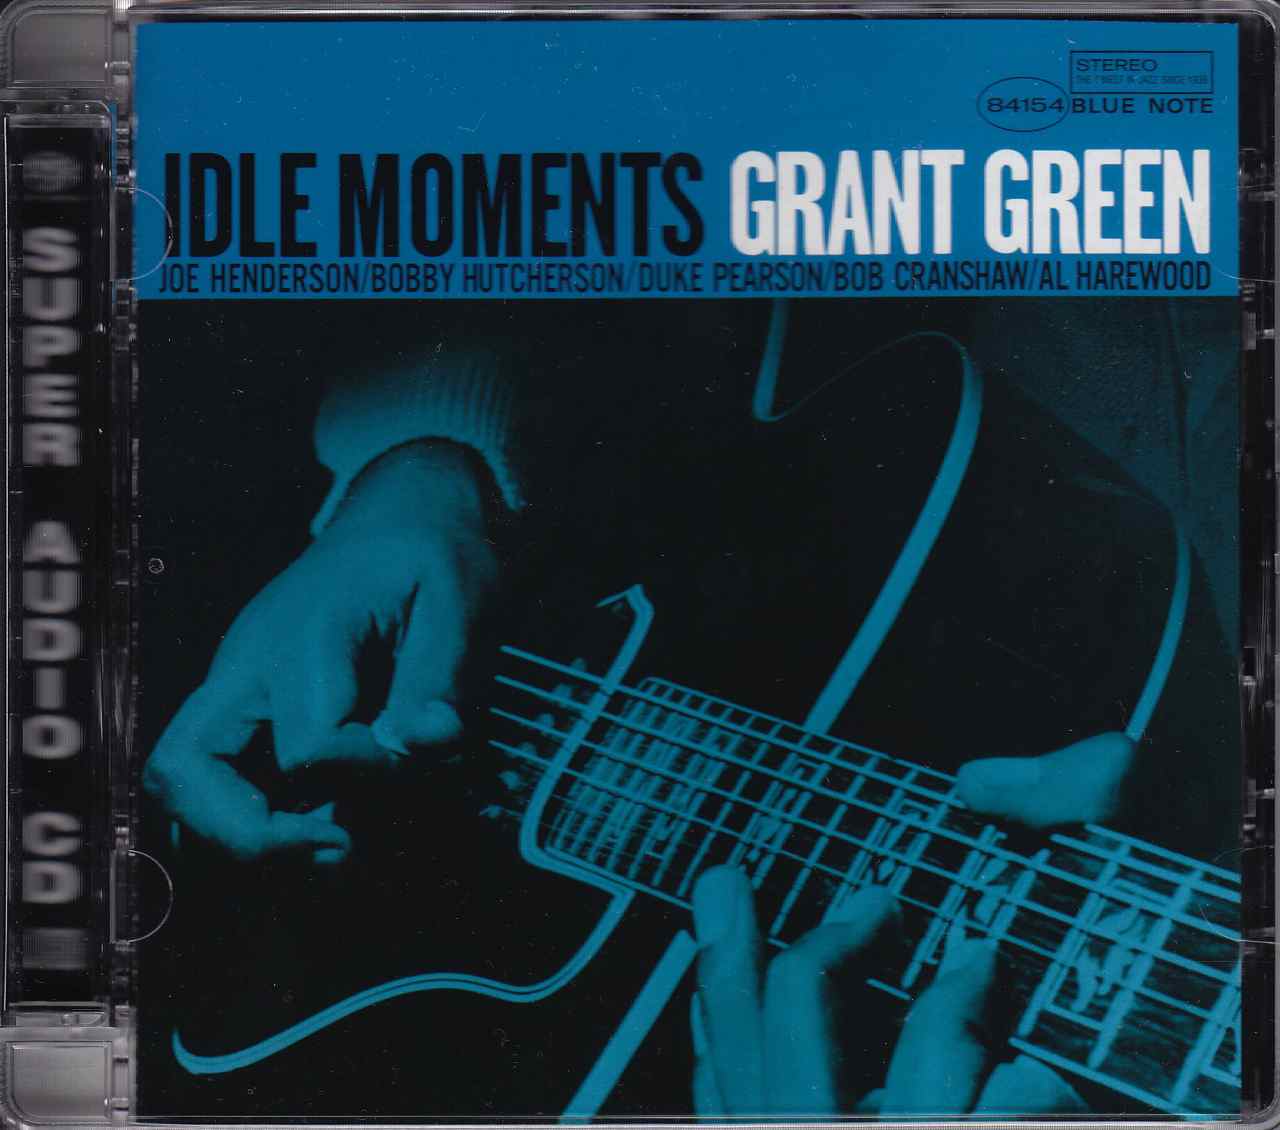 Grant Green - Idle Moments (1965) [Analogue Productions 2010] {SACD ISO + FLAC 24bit/88.2kHz}